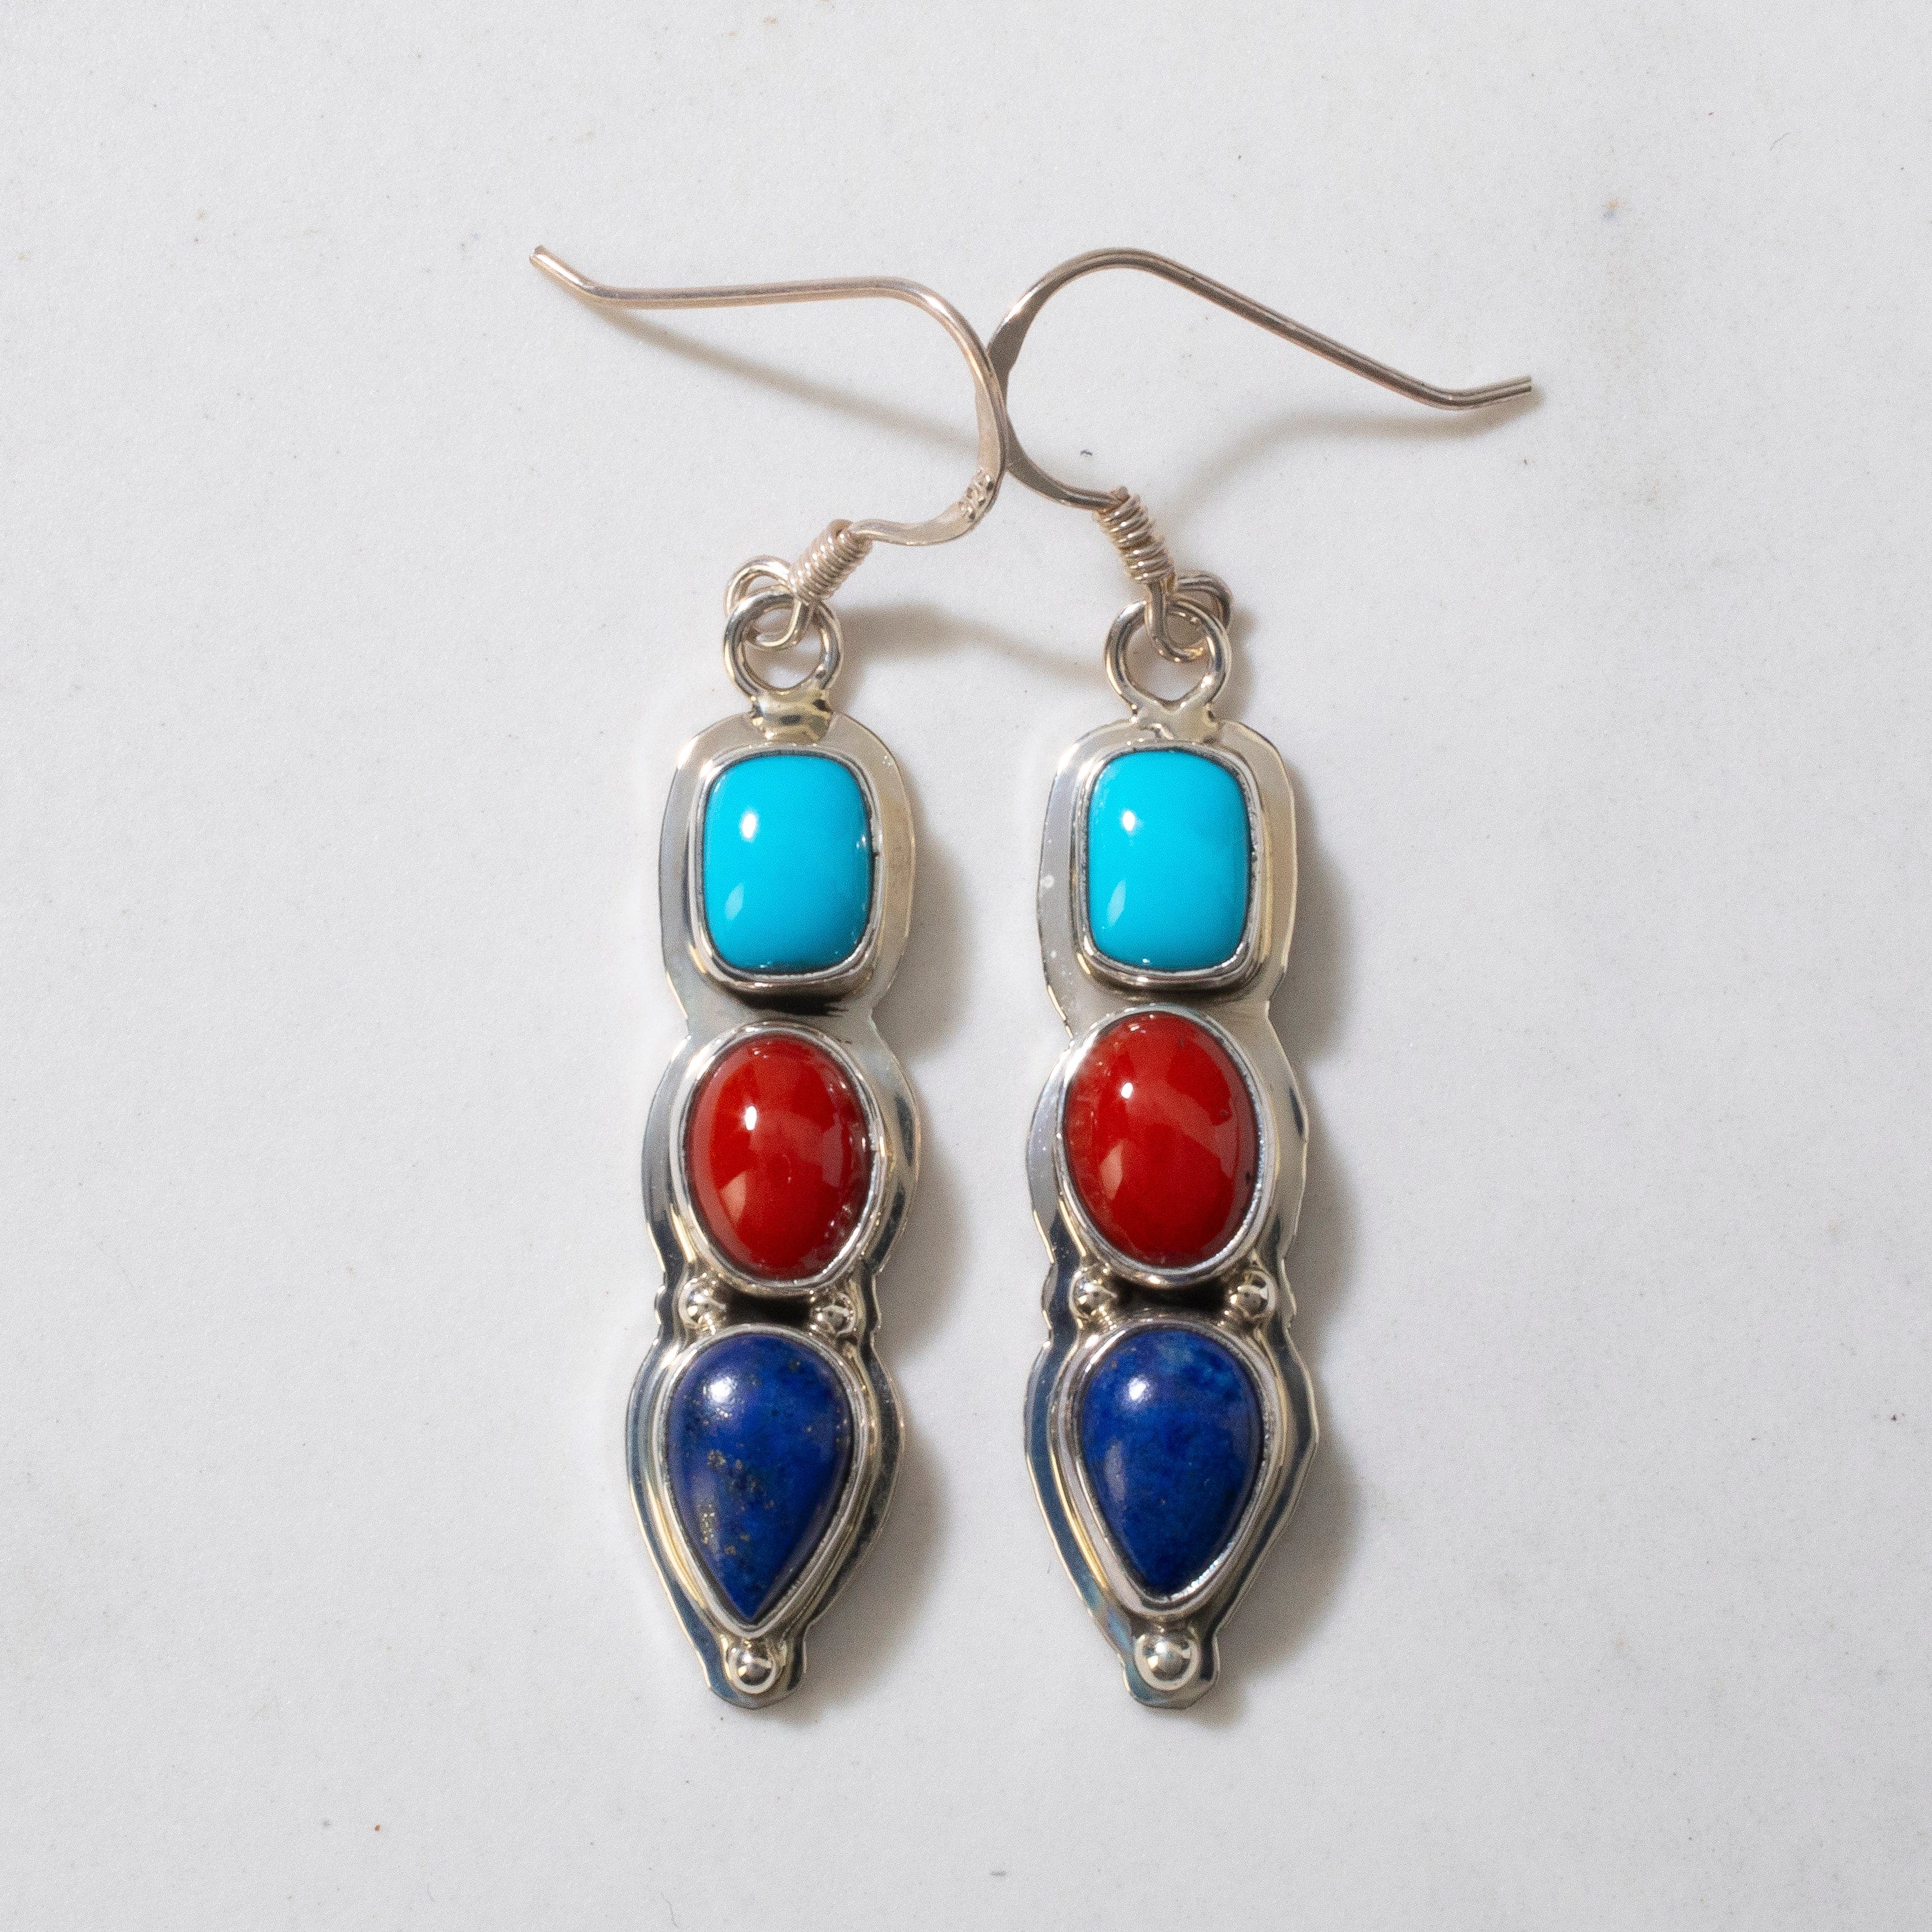 Kalifano Native American Jewelry Sleeping Beauty Turquoise, Red Coral, & Lapis Dangle Navajo USA Native American Made 925 Sterling Silver Earrings with French Hook NAE400.036